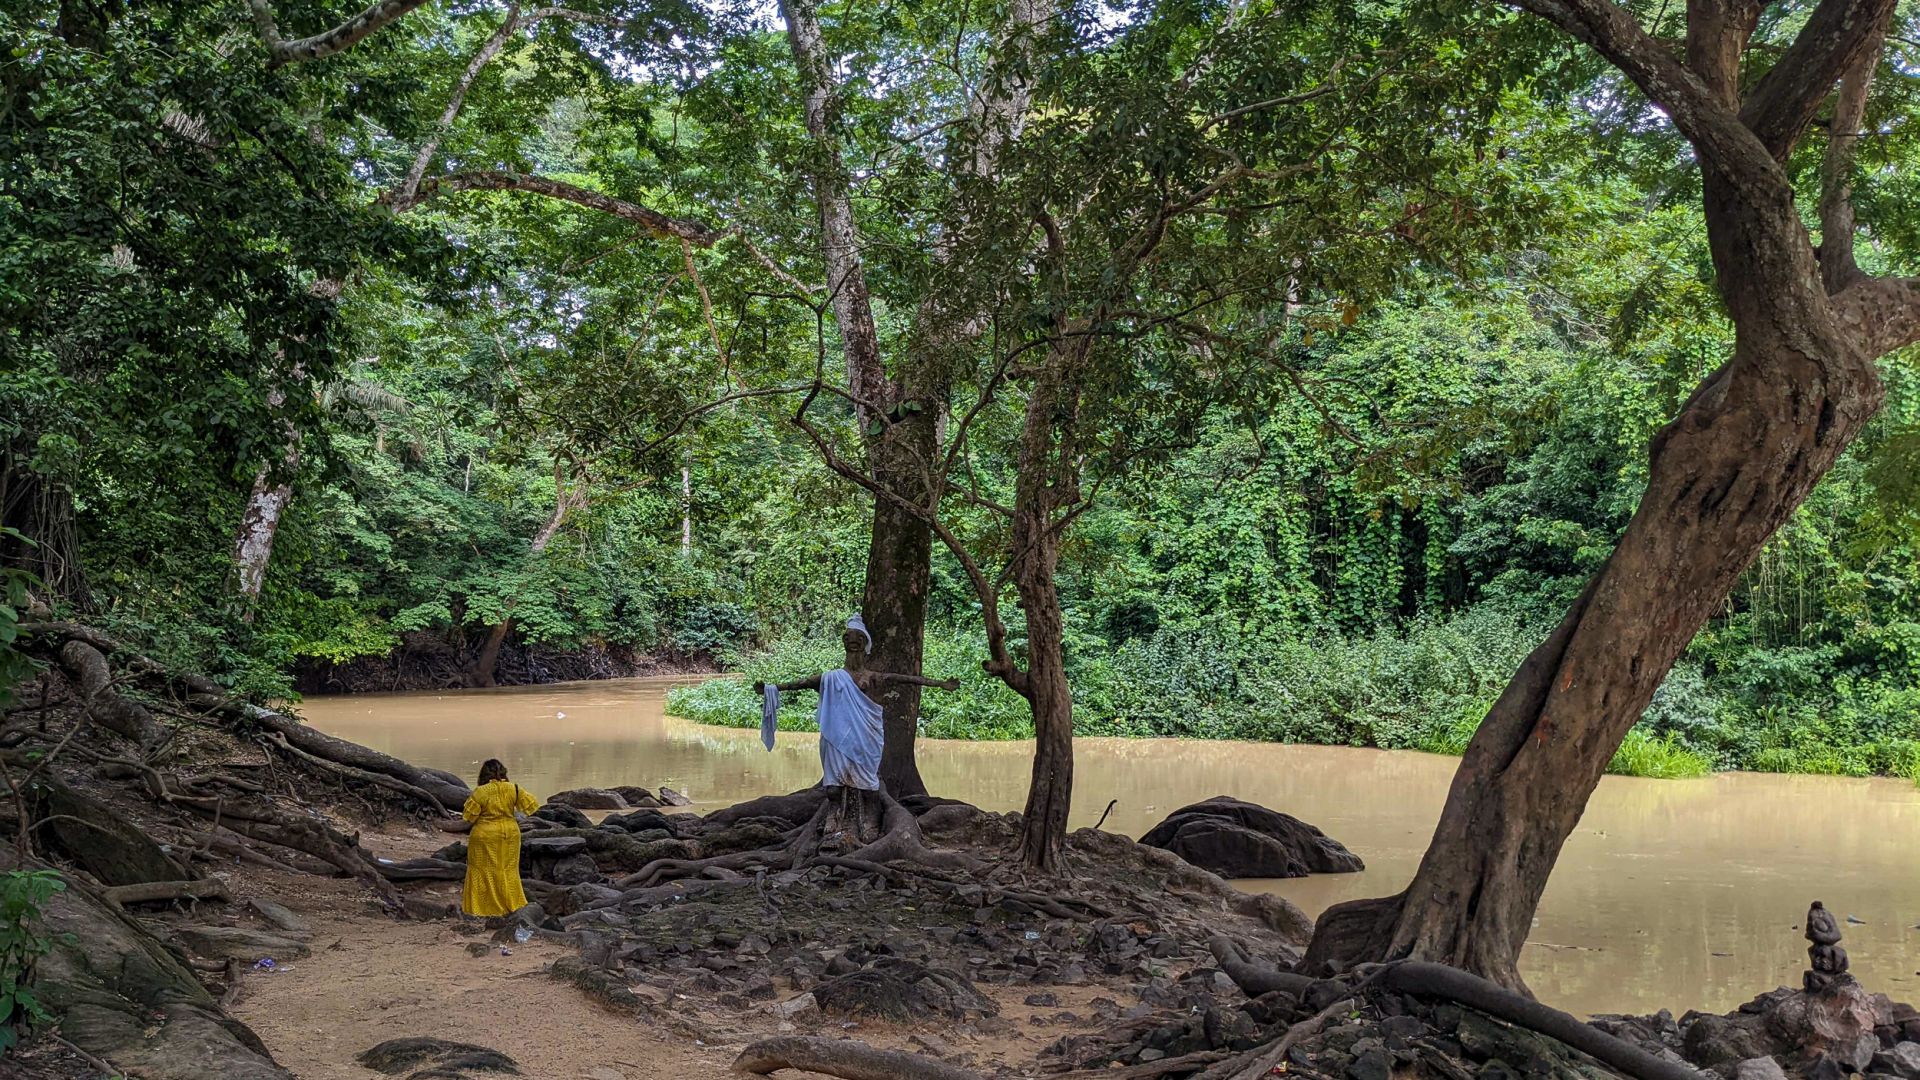 A female worshipper of Osun goes to the polluted section of the river within the sacred grove in Osogbo the state capital to pray to the goddess. [Eromo Egbejule/Al Jazeera]